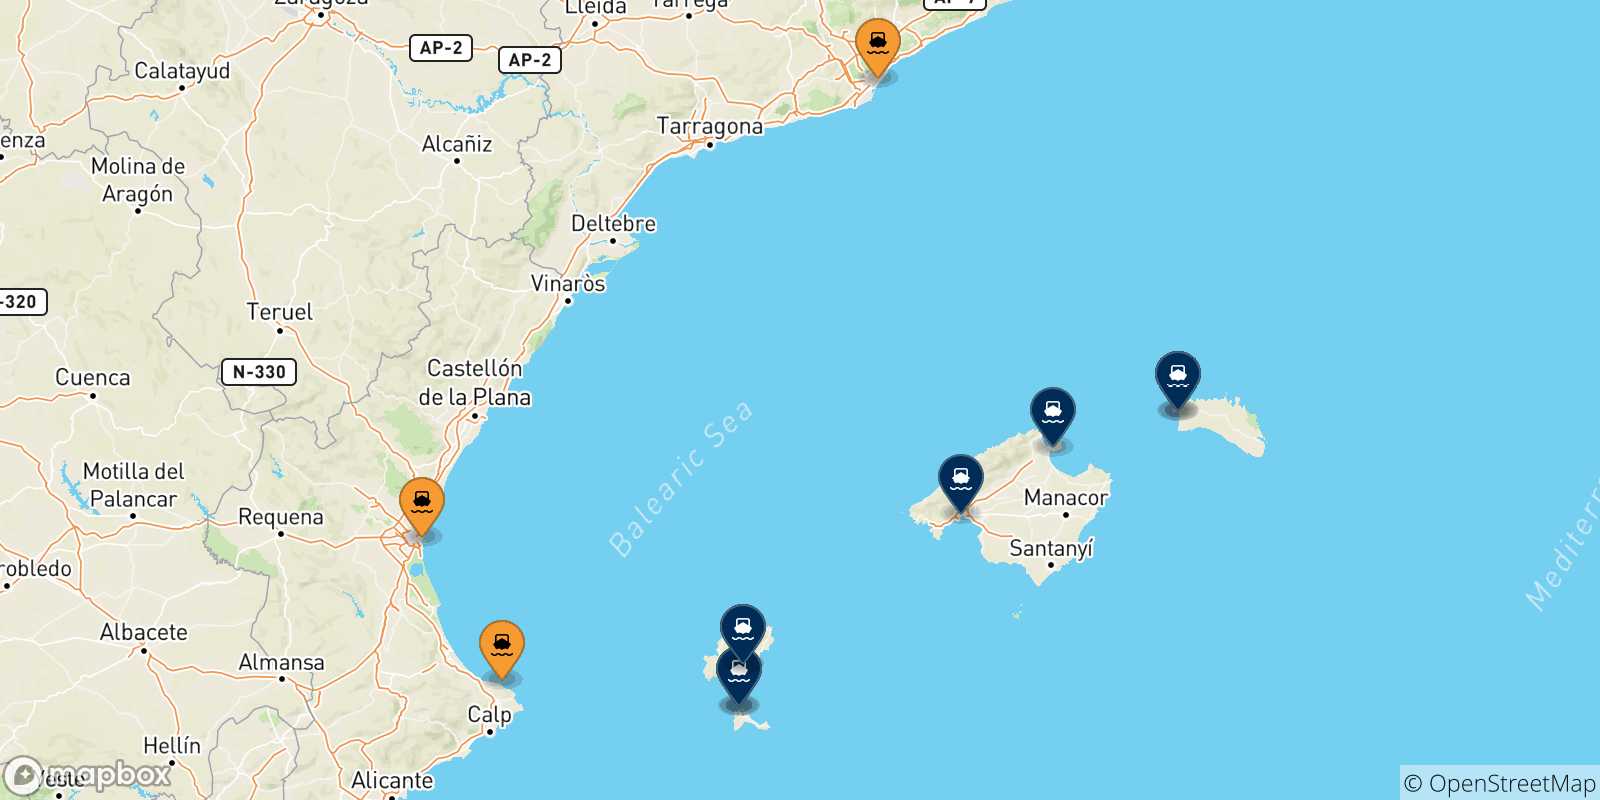 Map of the possible routes between Spain and Balearic Islands